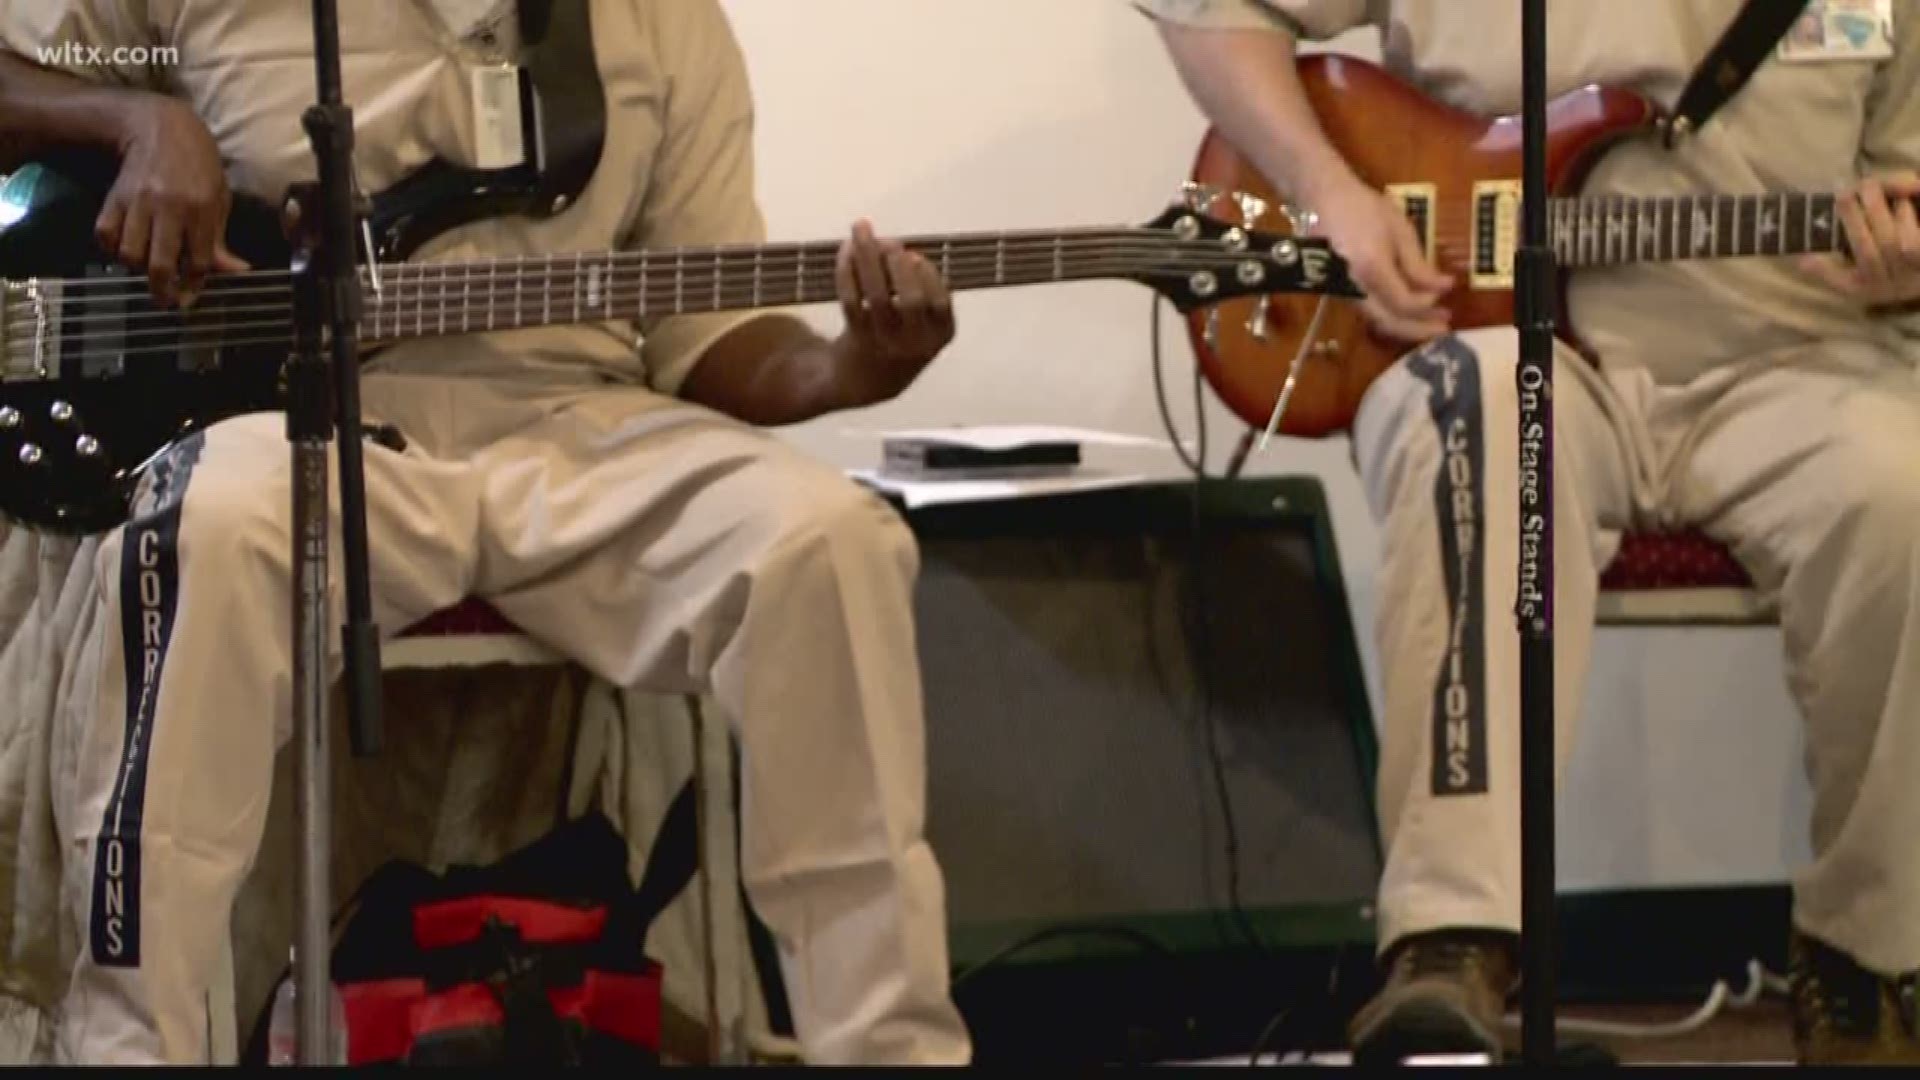 At Lee Correctional Institution, a maximum security prison, inmates got a chance to create music.